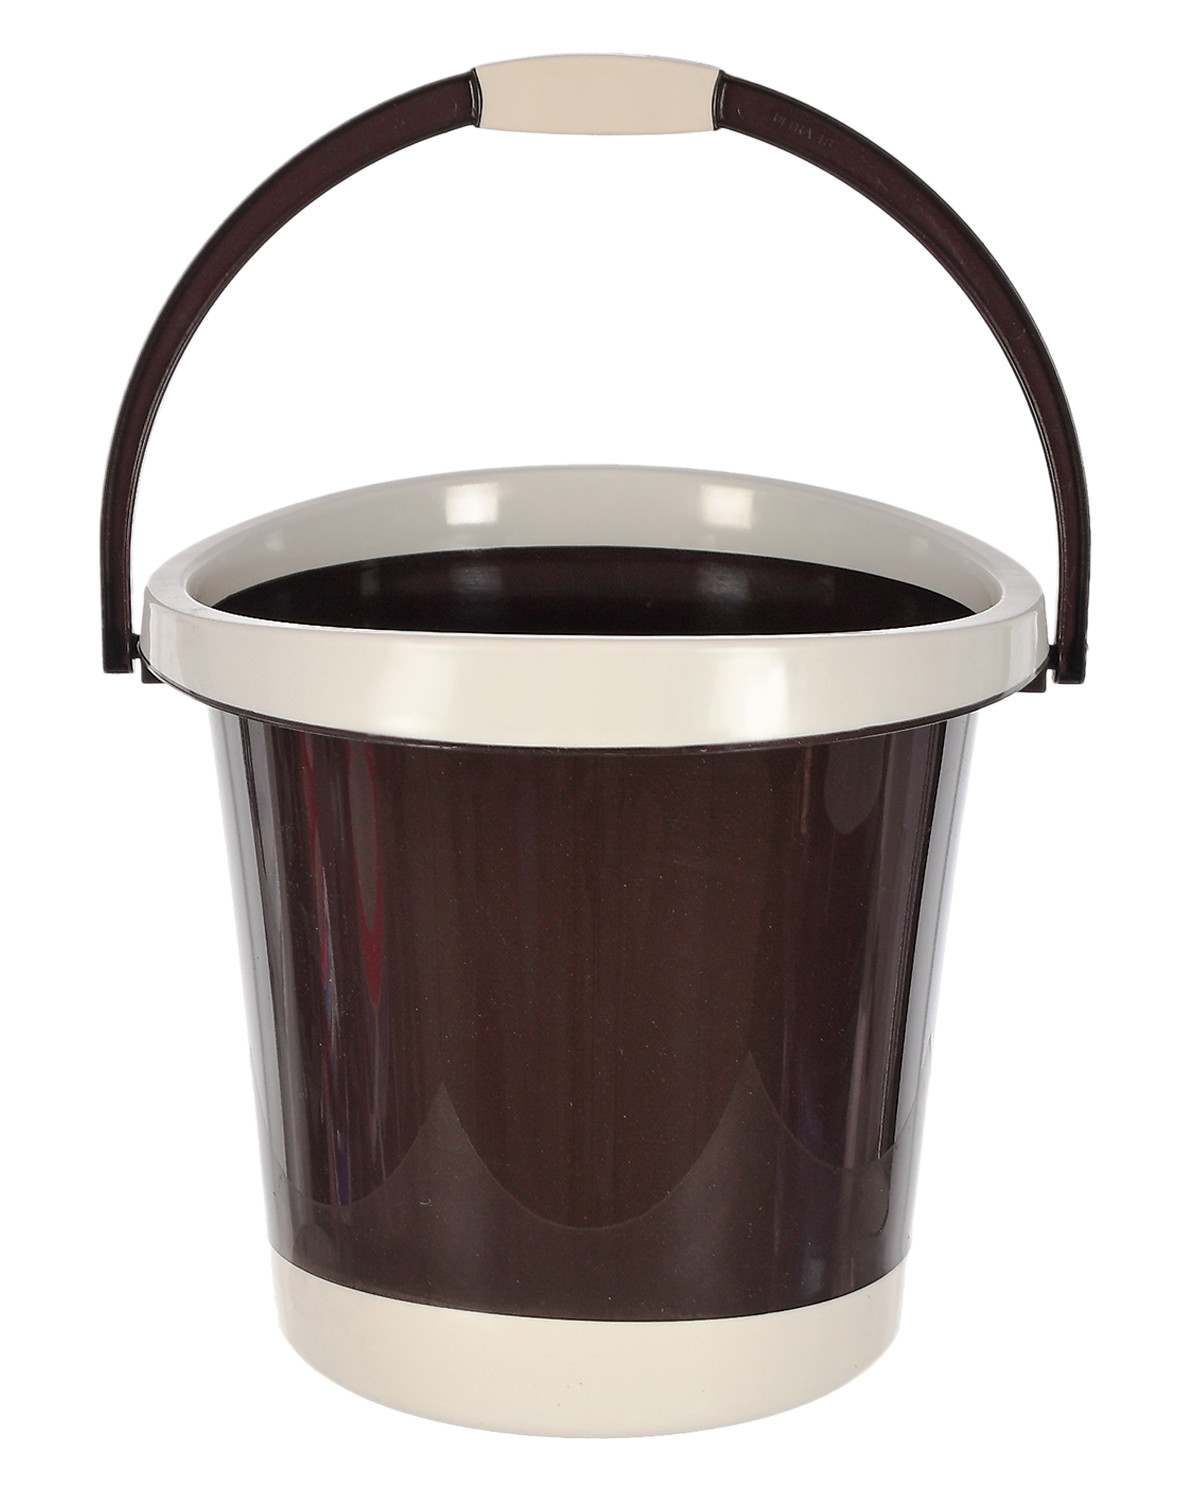 Kuber Industries Multiuses Plastic Bucket With Handle, 18 litre- Pack of 2 (Blue & Brown)-46KM0369